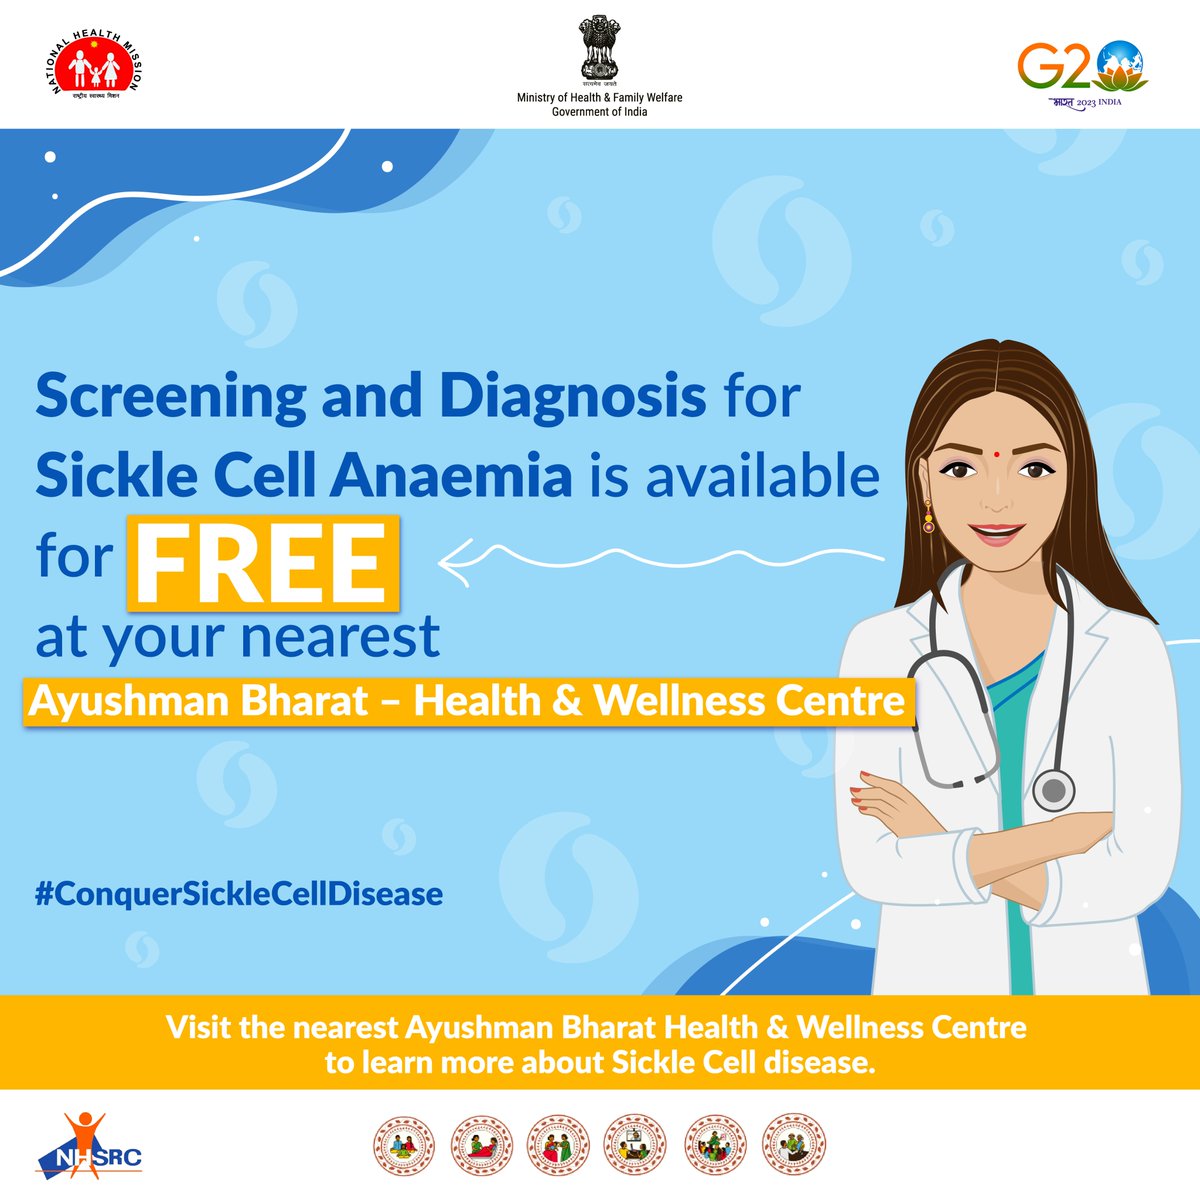 If you have symptoms or want to learn more about #SickleCellDisease, visit your nearest #AB_HealthandWellnessCentre. #ConquerSickleCellDisease @mansukhmandviya @DrBharatippawar @PMOIndia @MoHFW_INDIA @mygovindia @NITIAayog @NHSRCINDIA